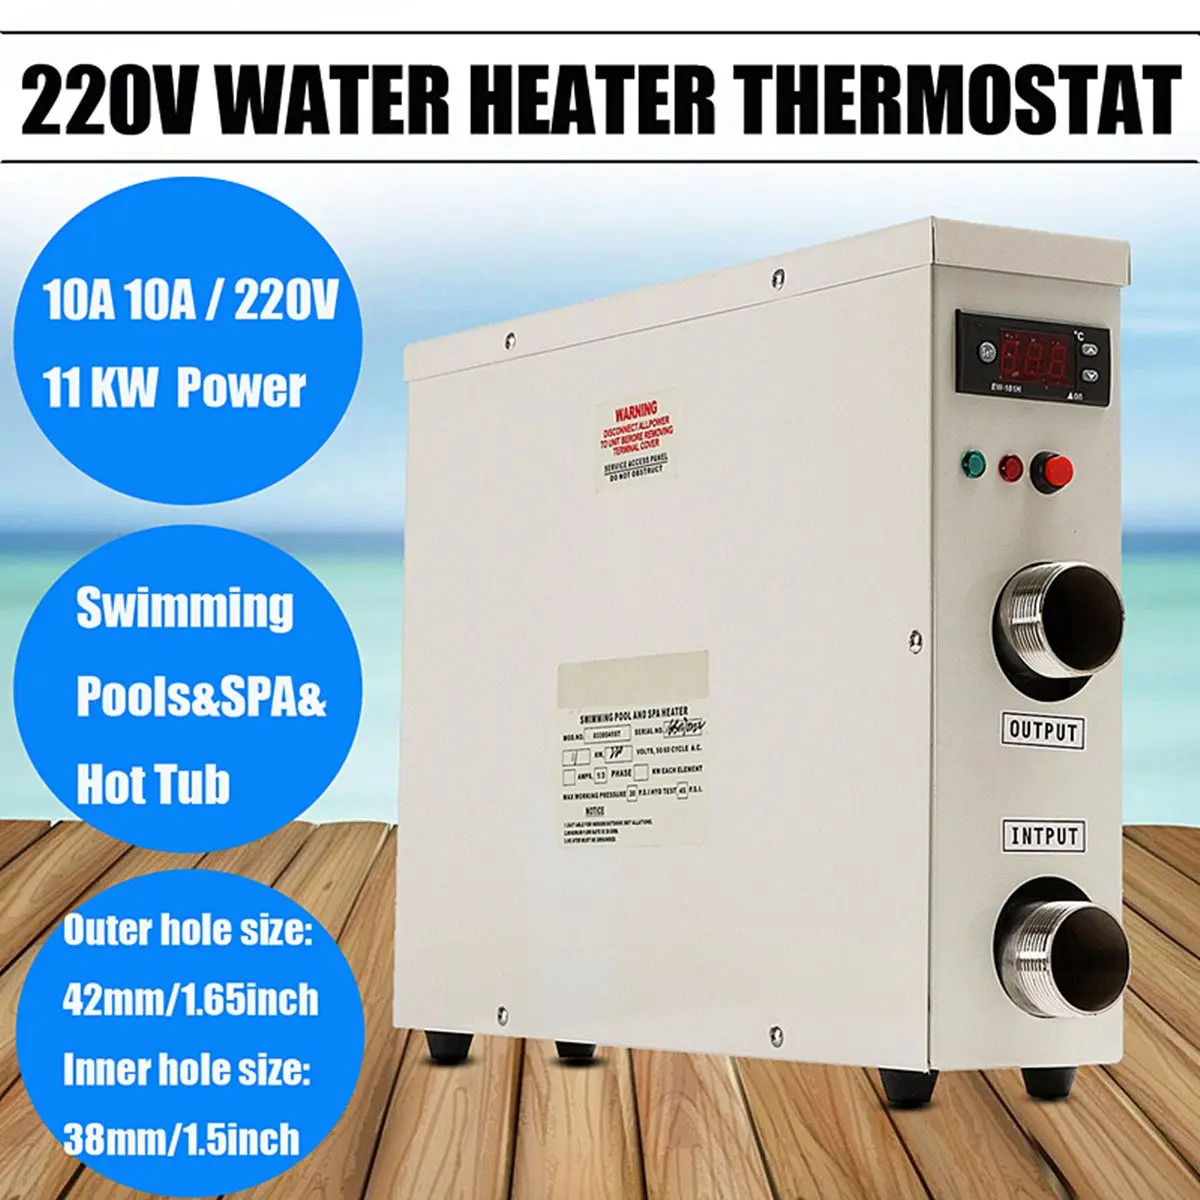 

warmtoo 11kW 220V Electric Digital Water Heater Thermostat for Swimming Pool SPA Hot Tub Bath Water Heating Water